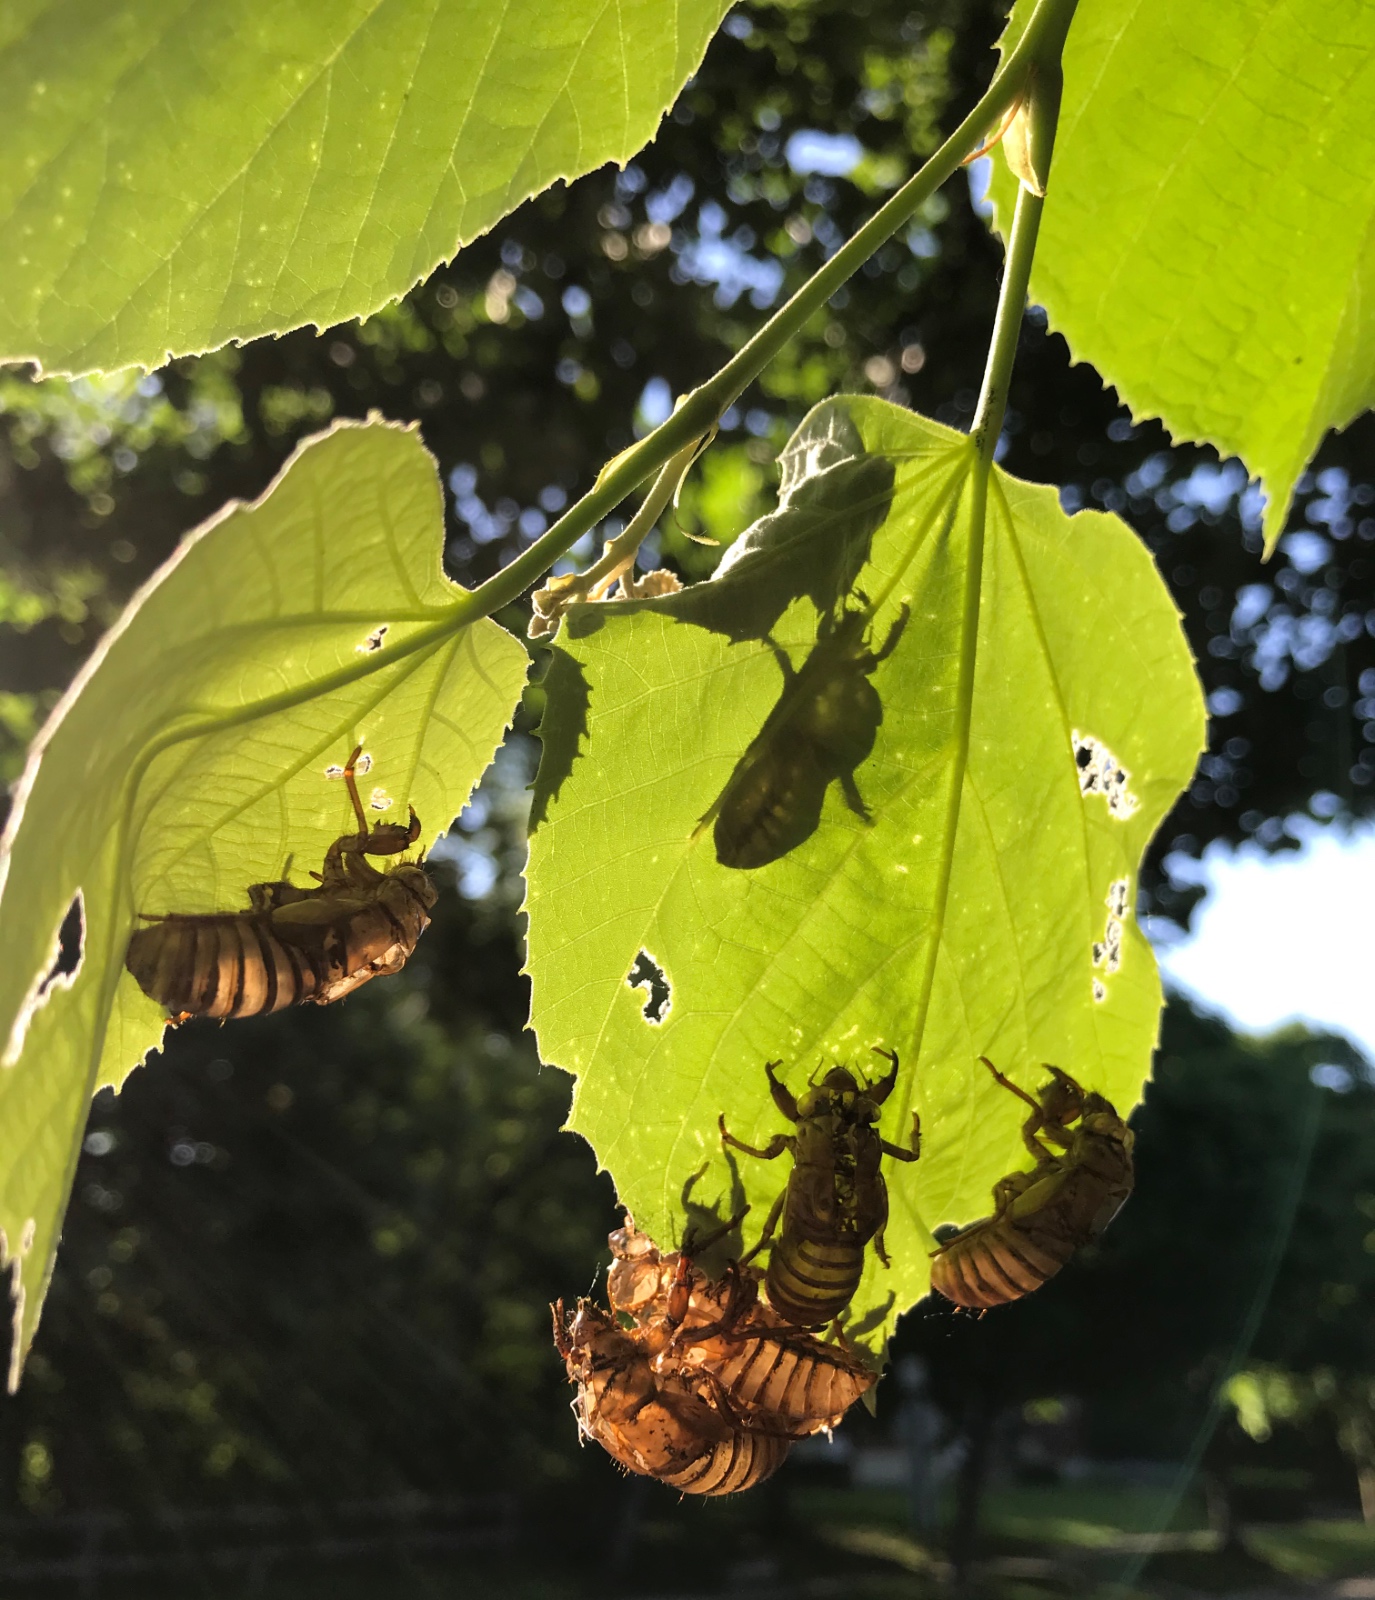 Eclosion Explosion (Cicada Nymph Skins)